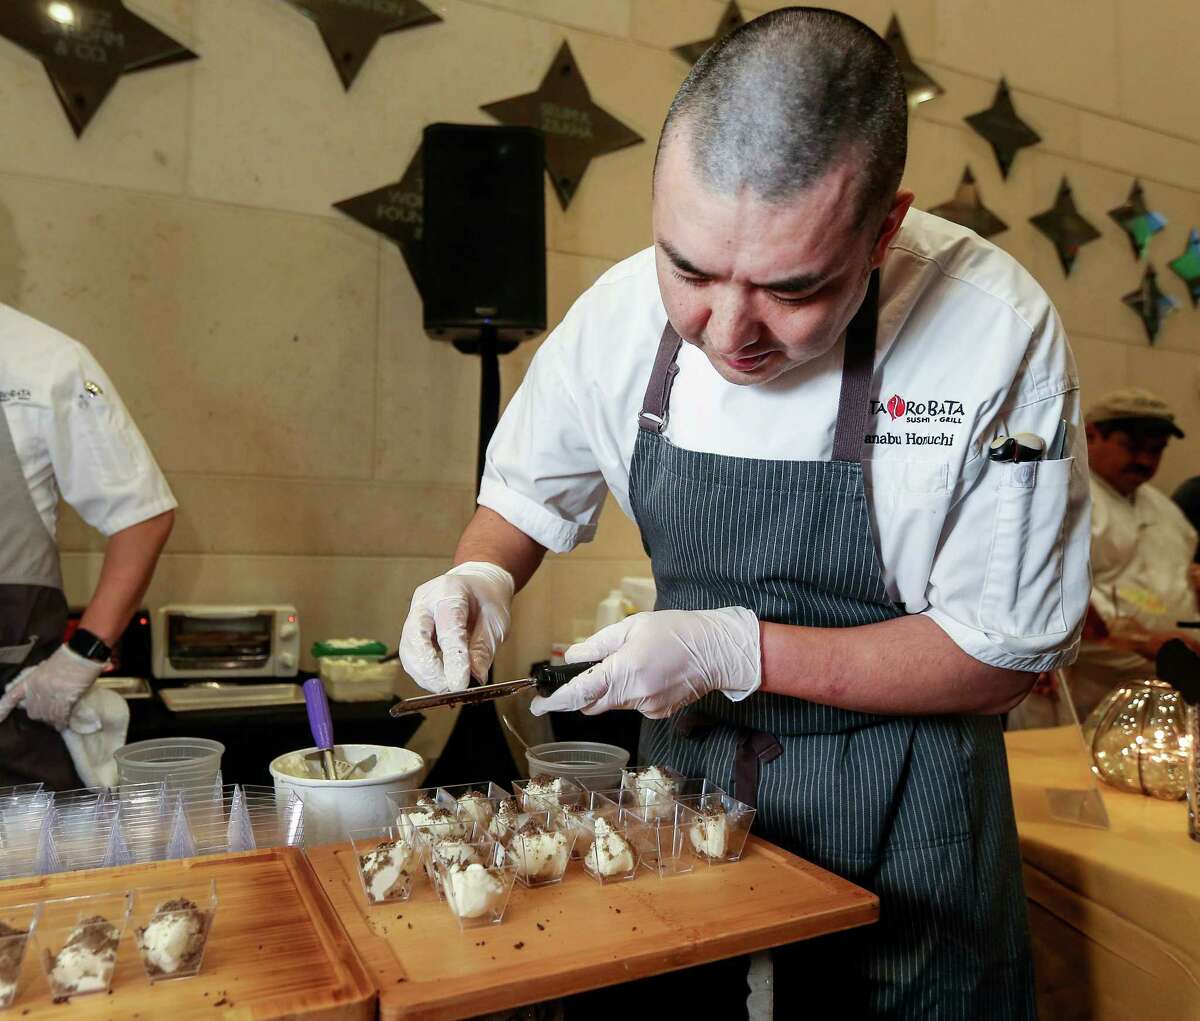 Manabu Horiuchi, the executive chef from Kata Robata, prepares honey truffle ice cream at Truffle Masters 2017, at the Hobby Center. Horiuchi won first place; he also created an open face truffle banh mi sandwich.